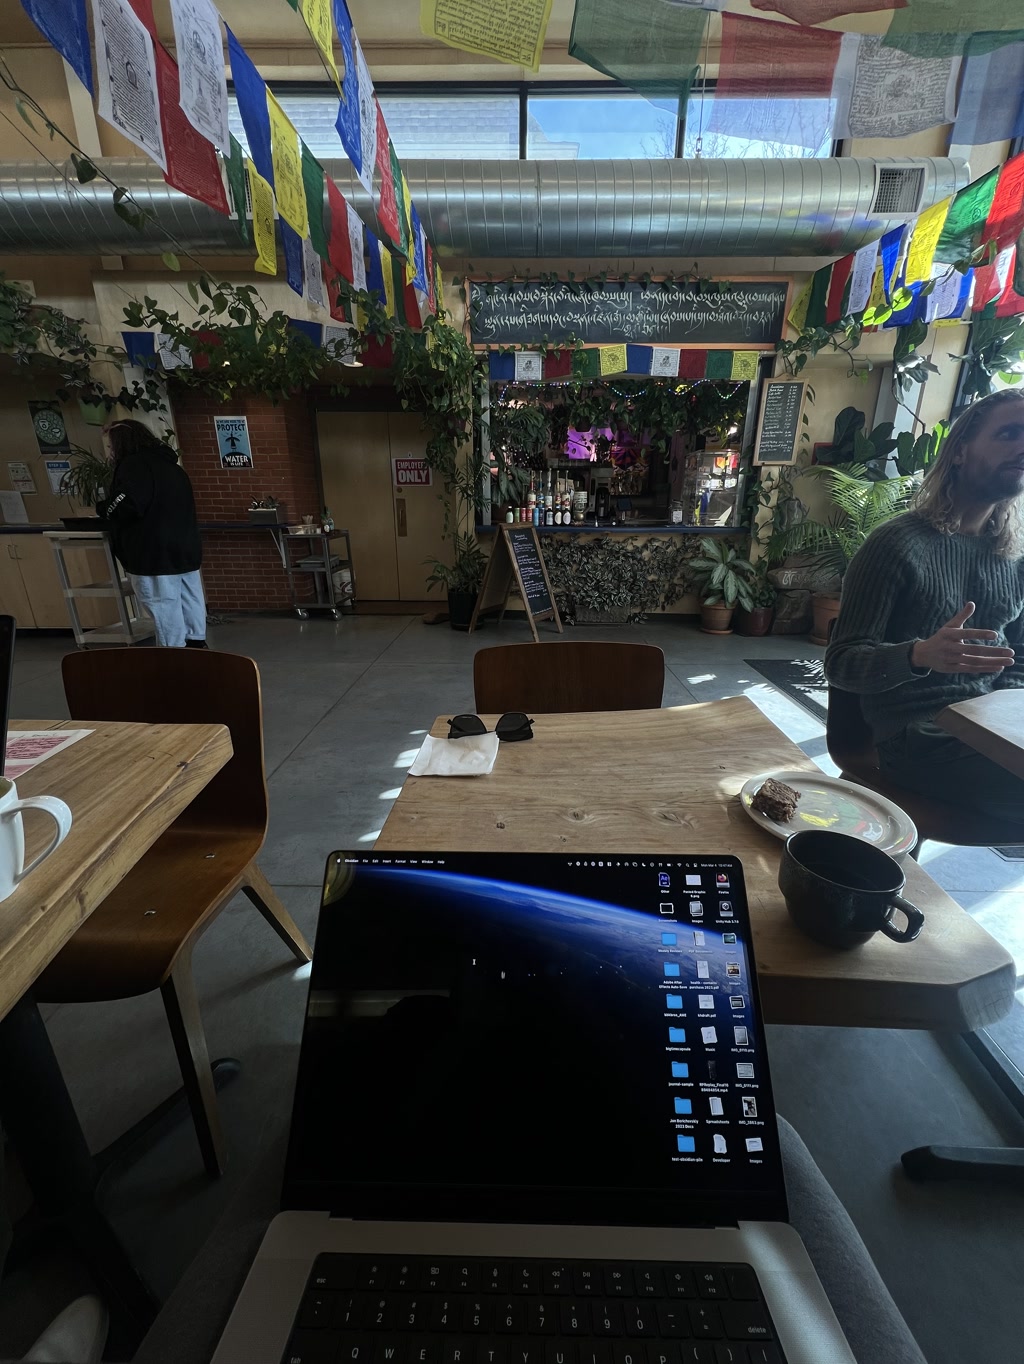 A cozy cafe setting with Tibetan prayer flags strung across the ceiling. Sunlight filters through large windows, casting a warm glow on the indoor plants and the rustic wooden furniture. A person stands at a counter in the back, while another person with long hair sits at a table in the foreground, partially blurred in motion. A laptop is open on a table in the lower right corner, its screen filled with numerous icons, next to a black coffee mug and a plate with a half-eaten treat. The colorful flags feature intricate designs and text, contributing to the serene and eclectic atmosphere.